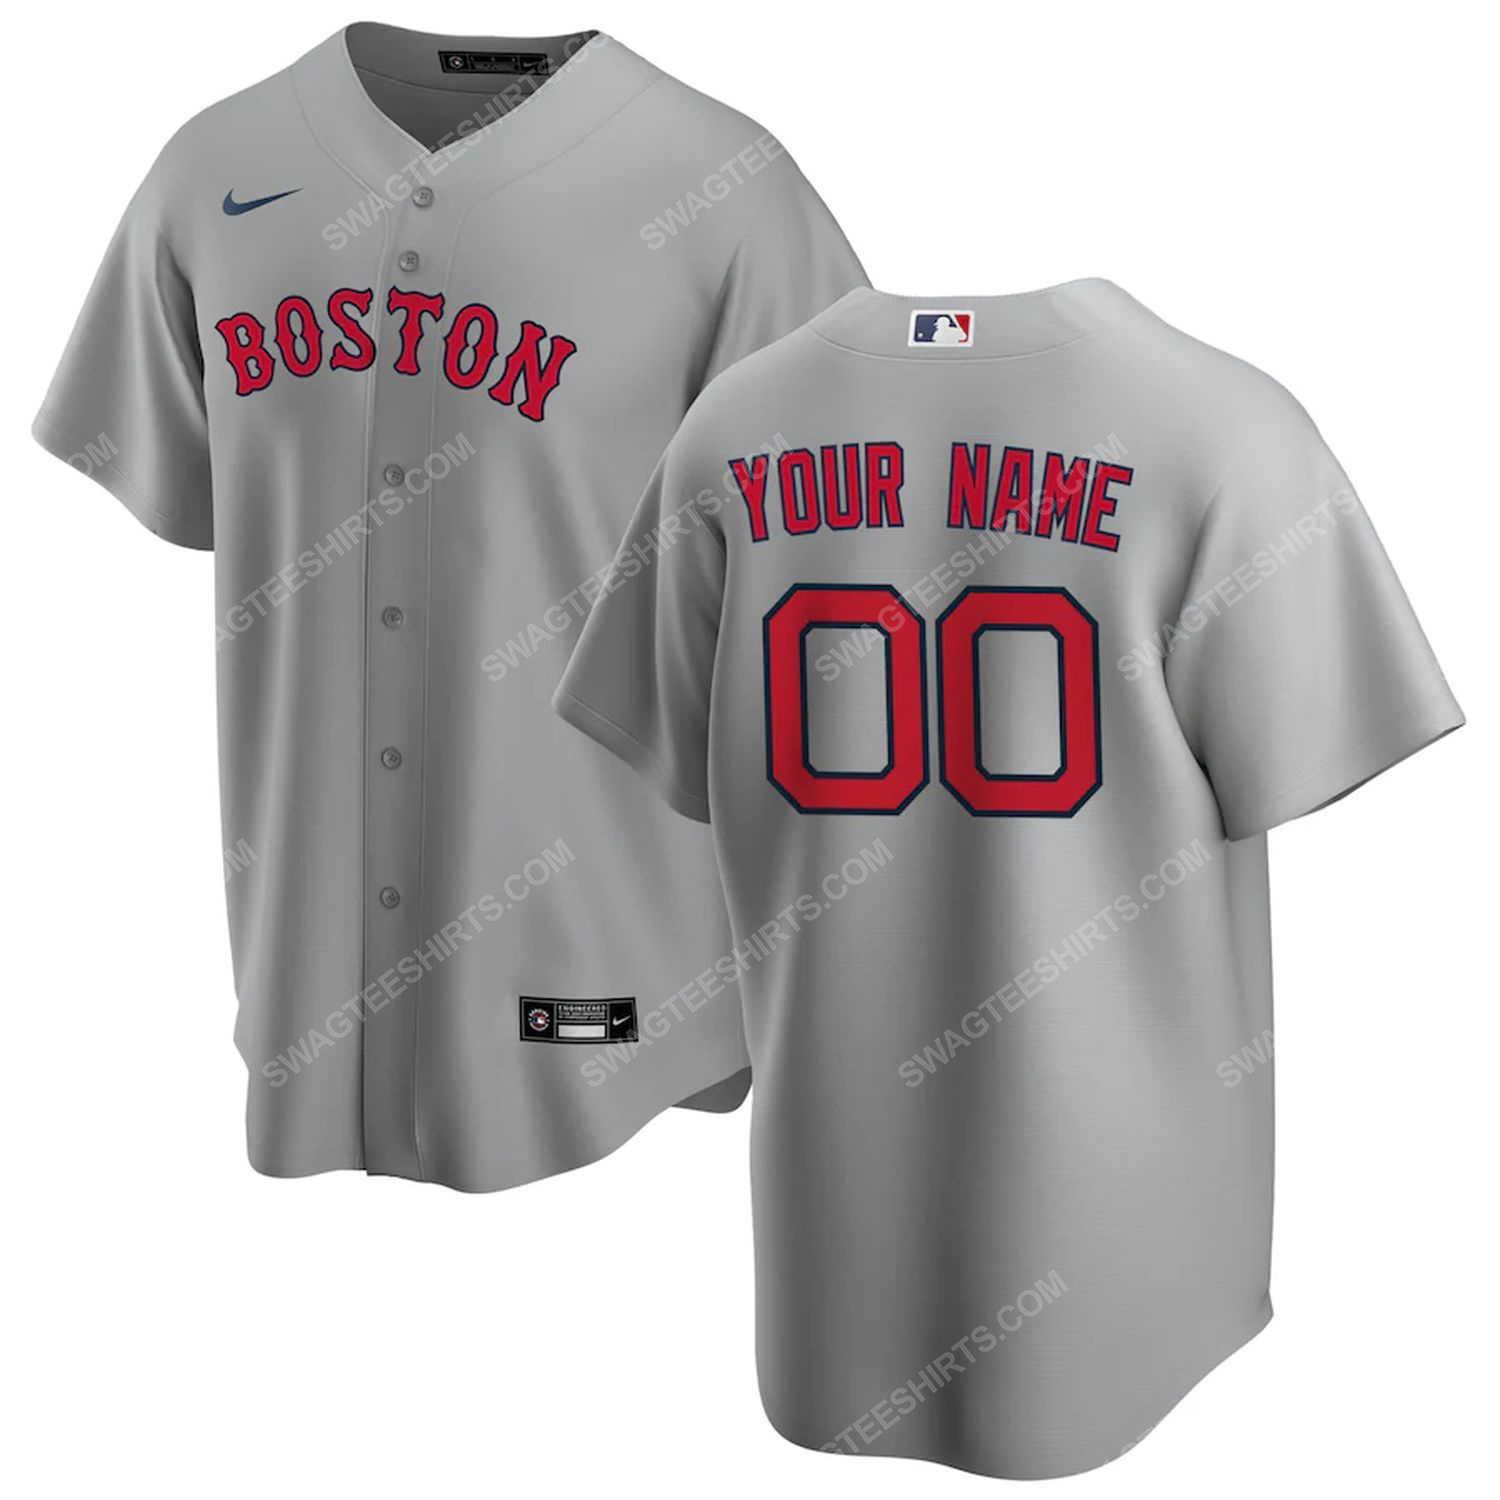 [special edition] Personalized mlb boston red sox baseball jersey – maria